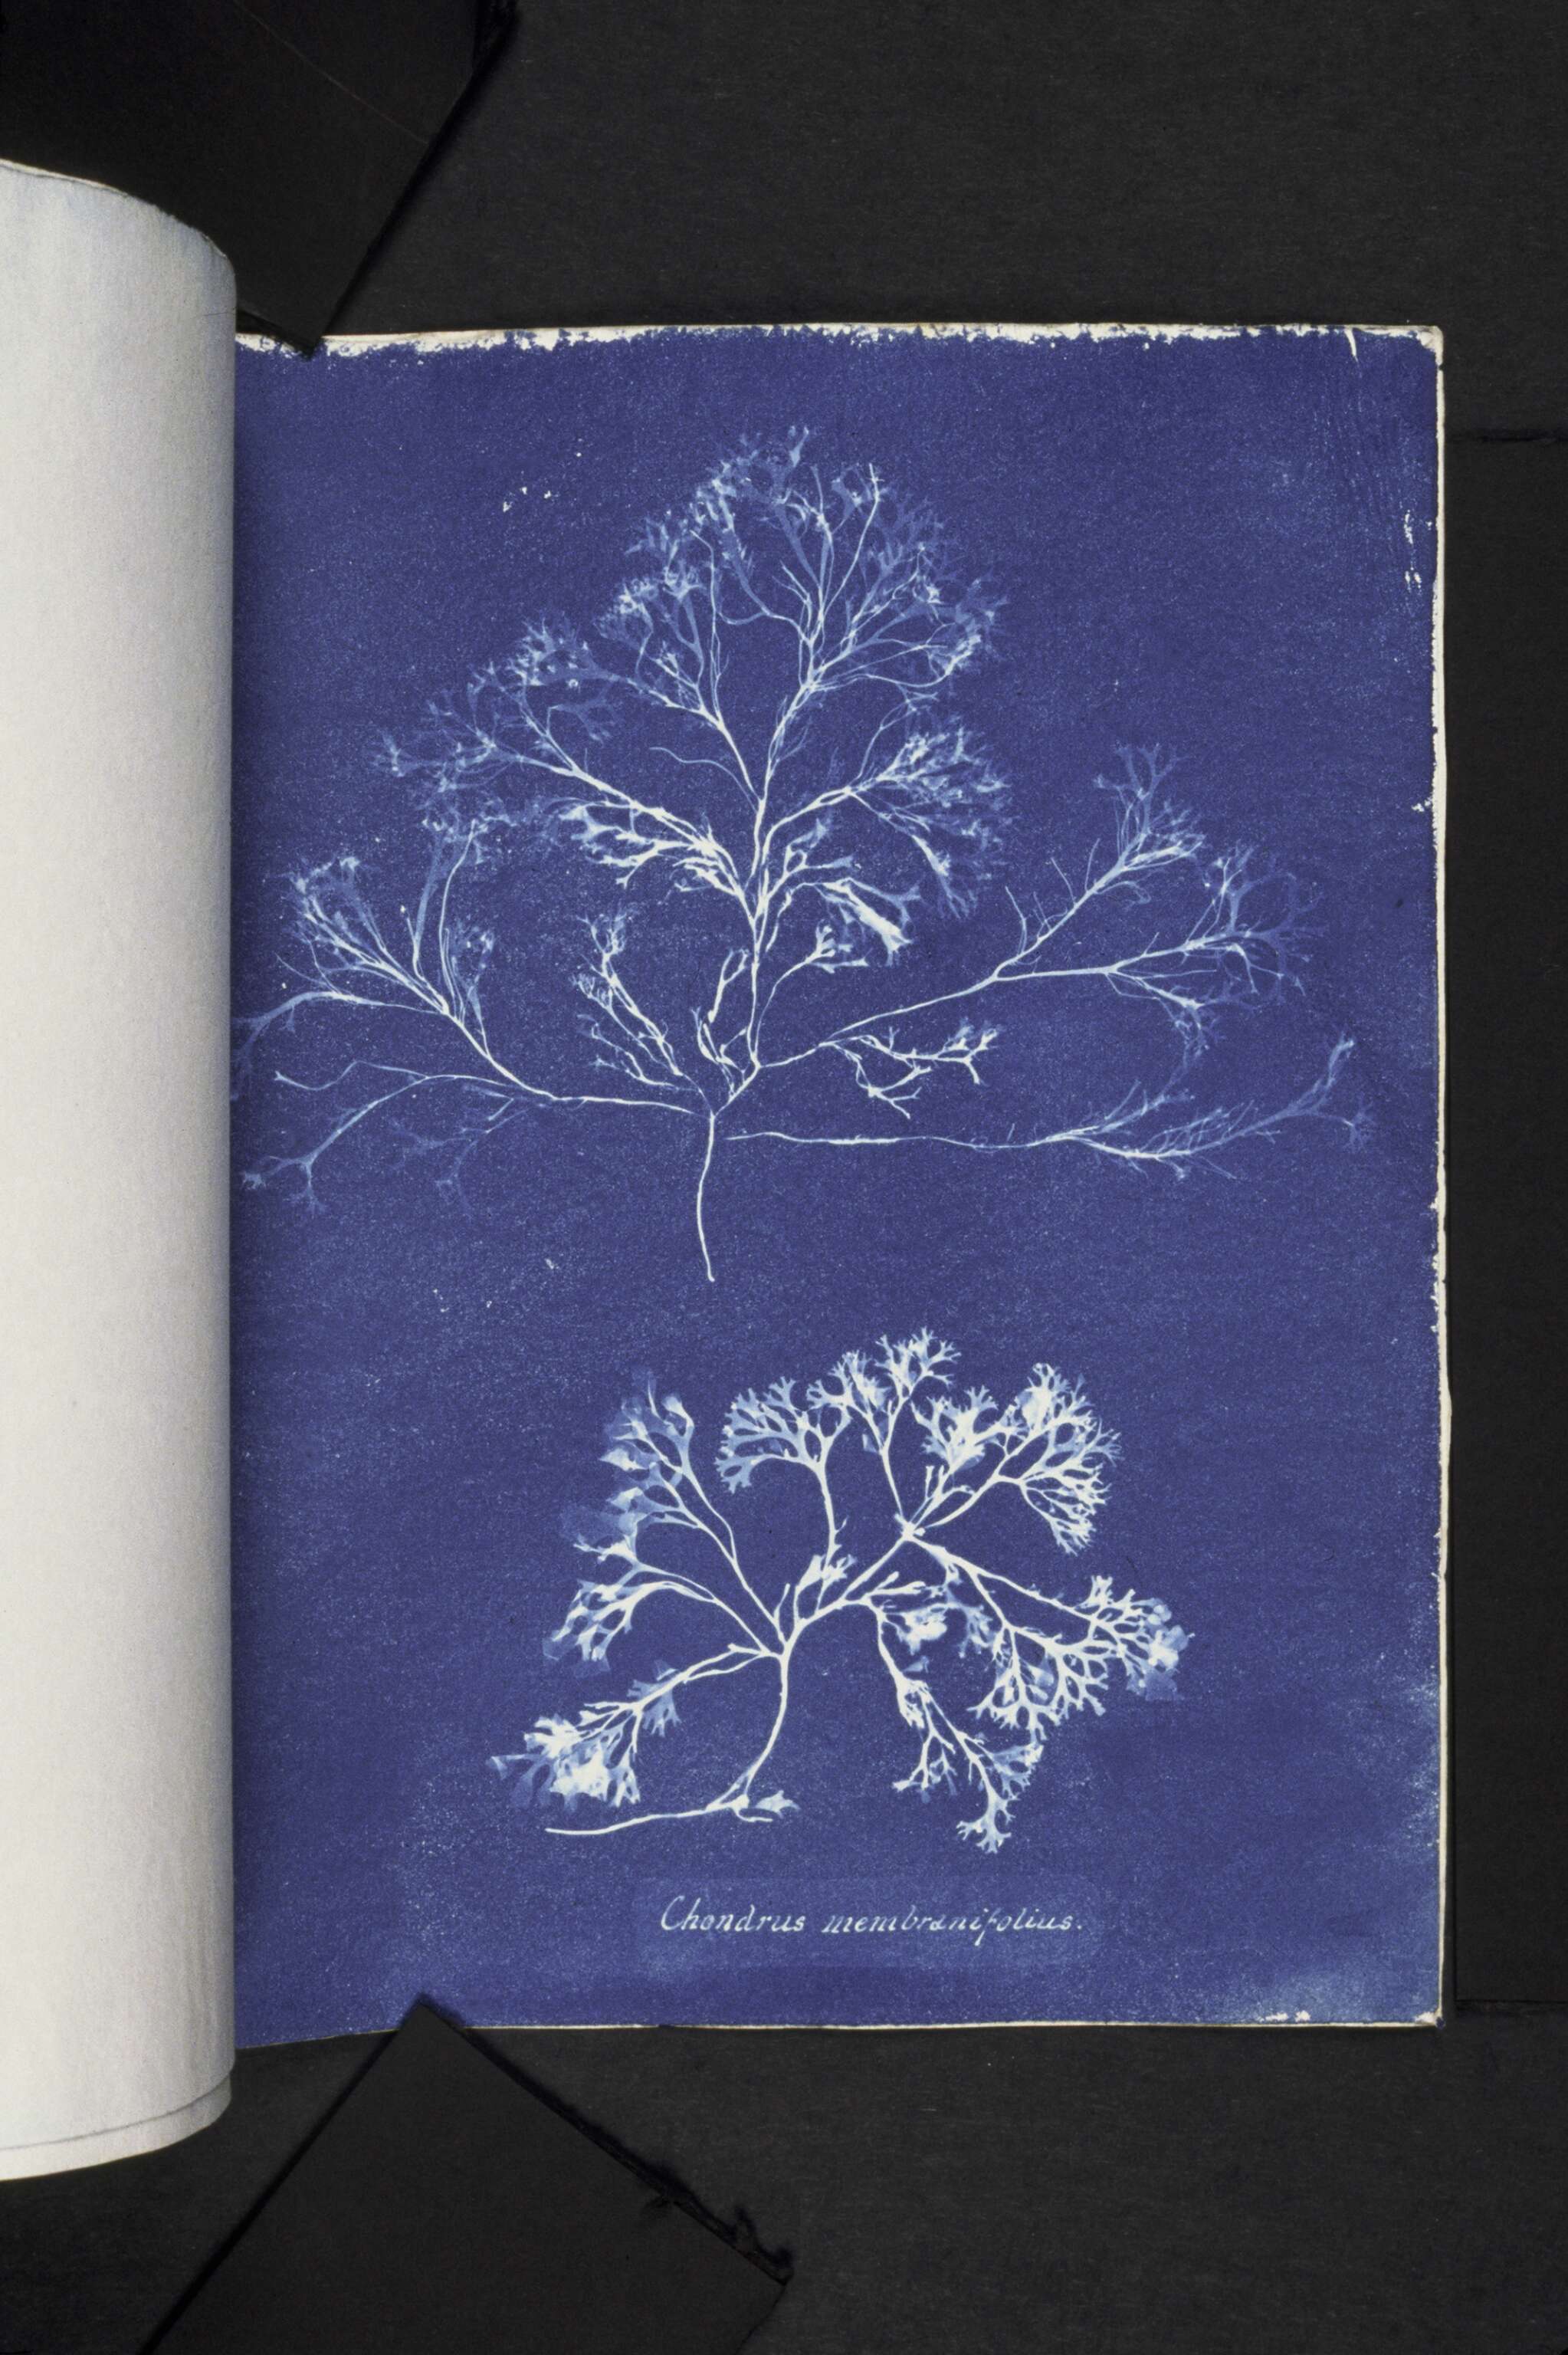 Image of Phyllophora pseudoceranoides (S. G. Gmelin) Newroth & A. R. A. Taylor 1971